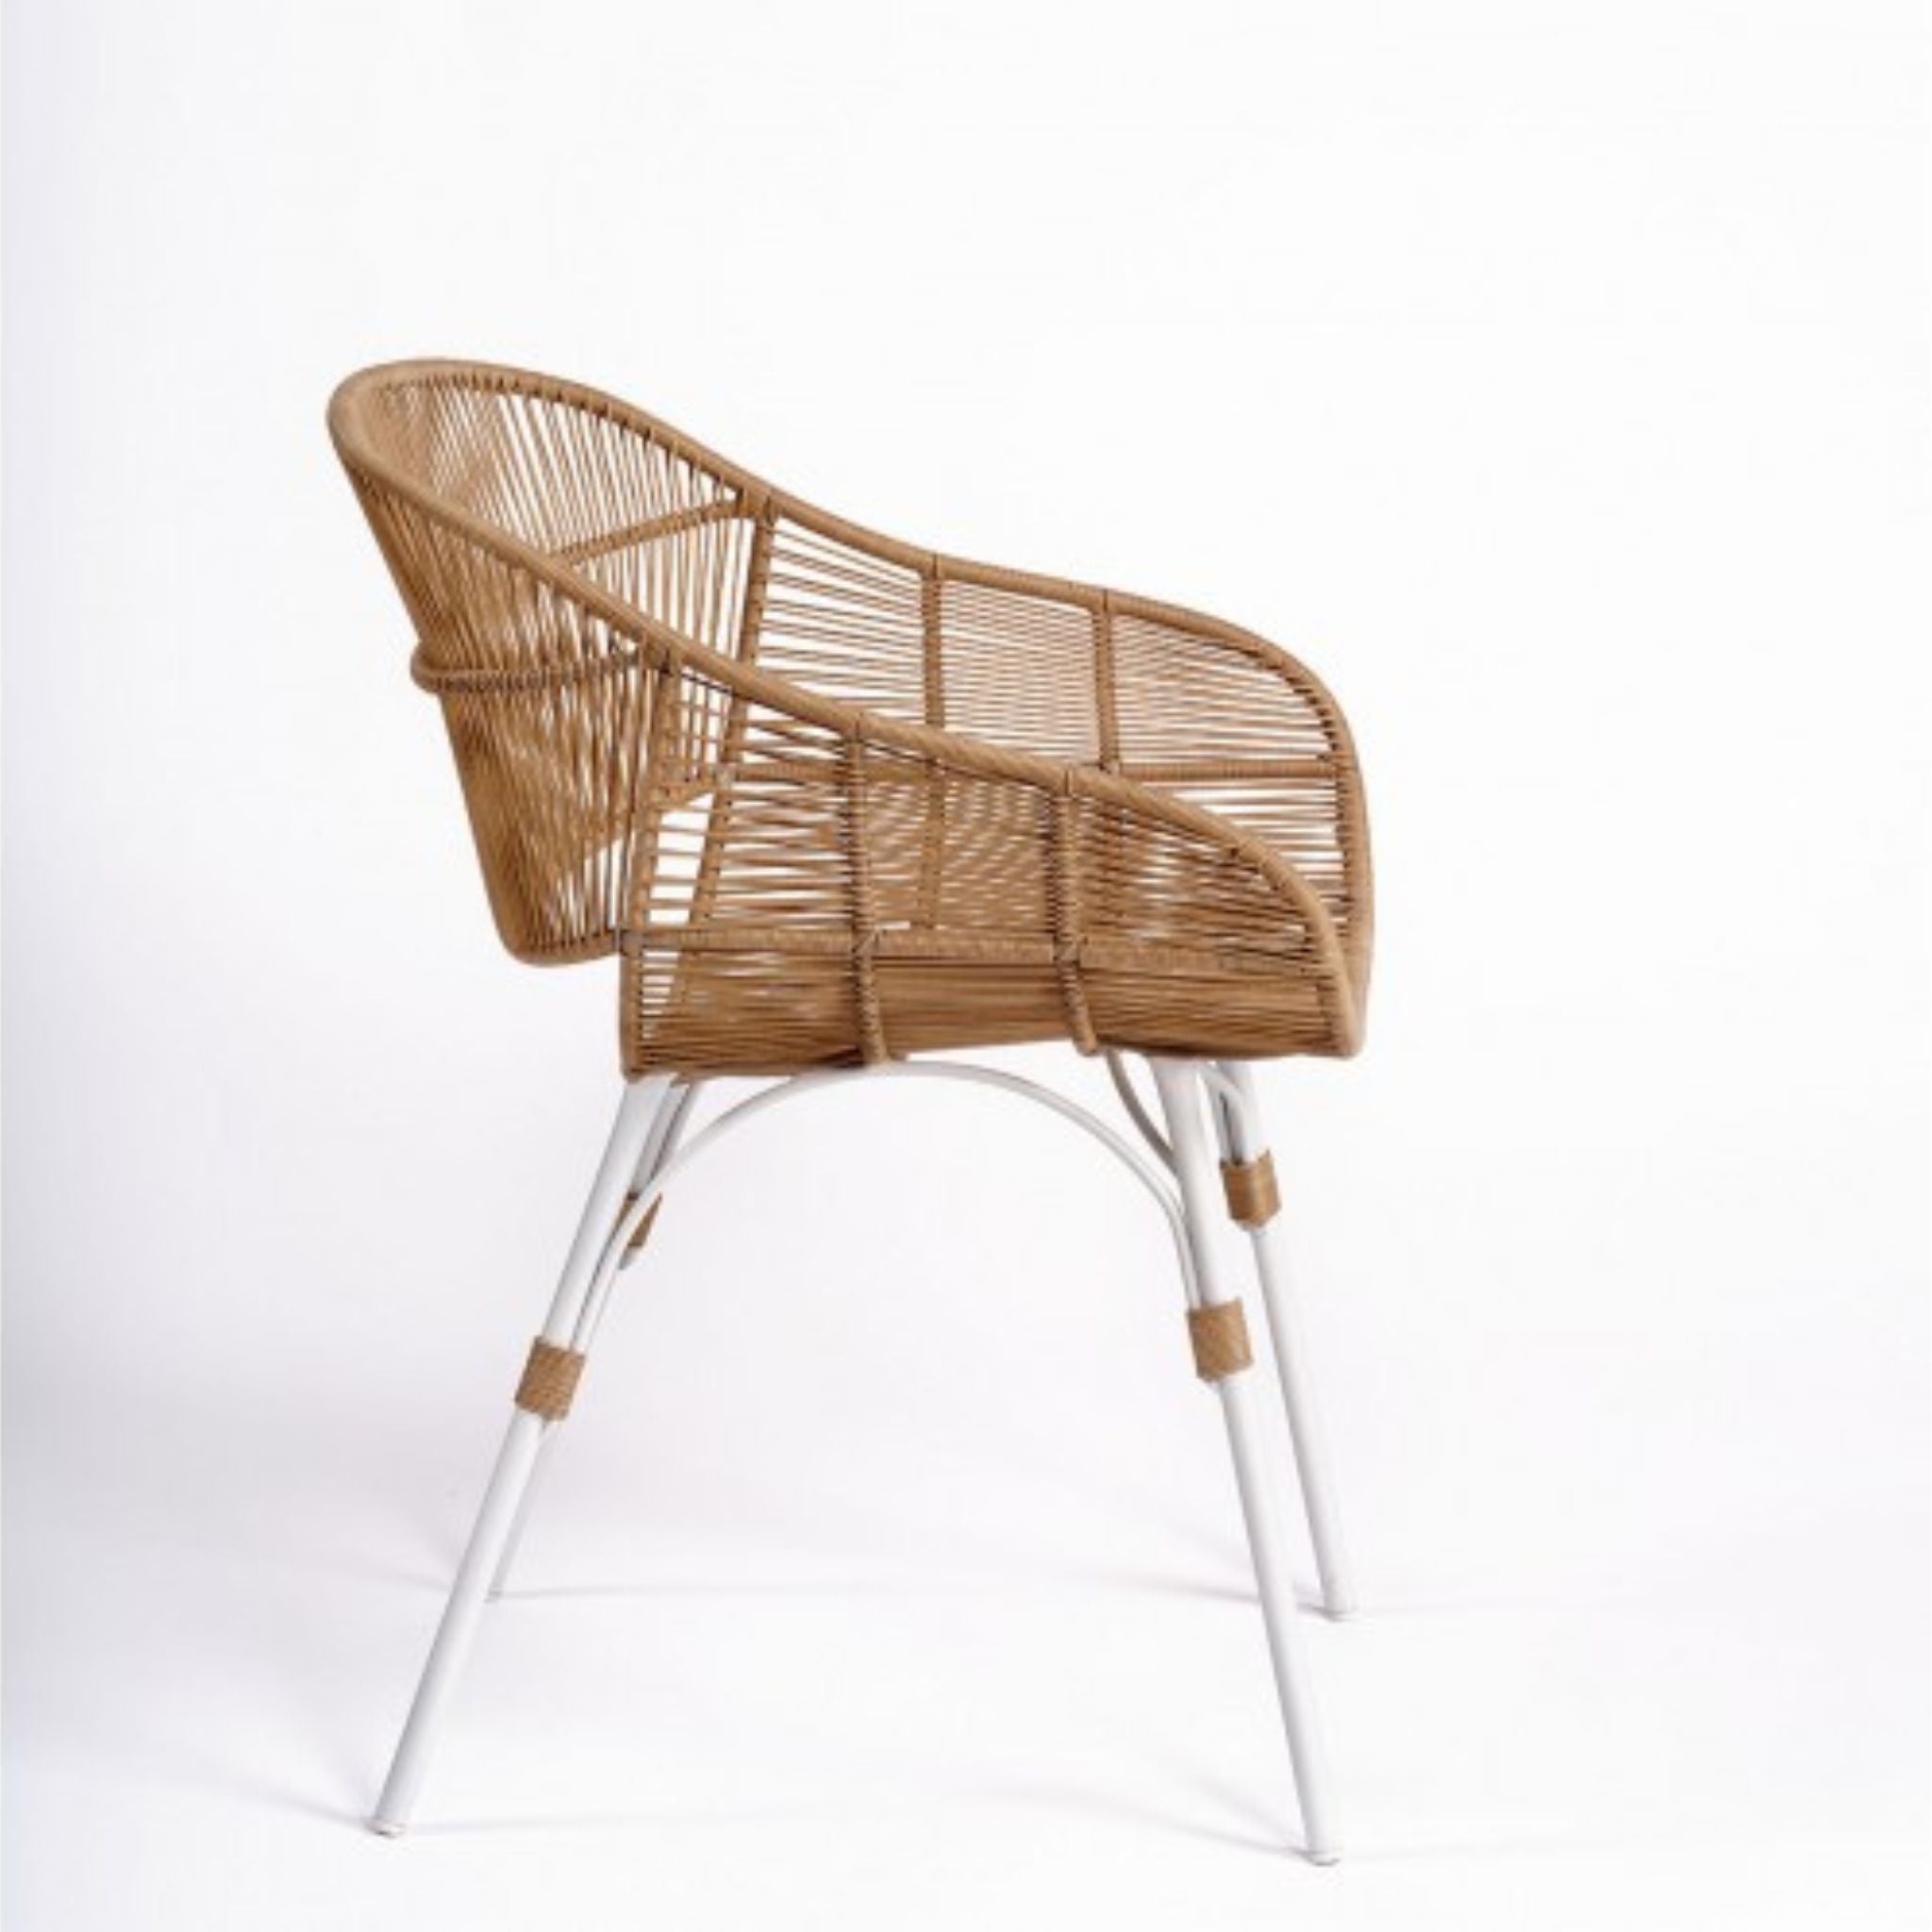 Crisal Decoracion Lopa Outdoor Chair with Arms in Natural Colour Resin and Stone Coloured Metal Leg - ModernistaLiving